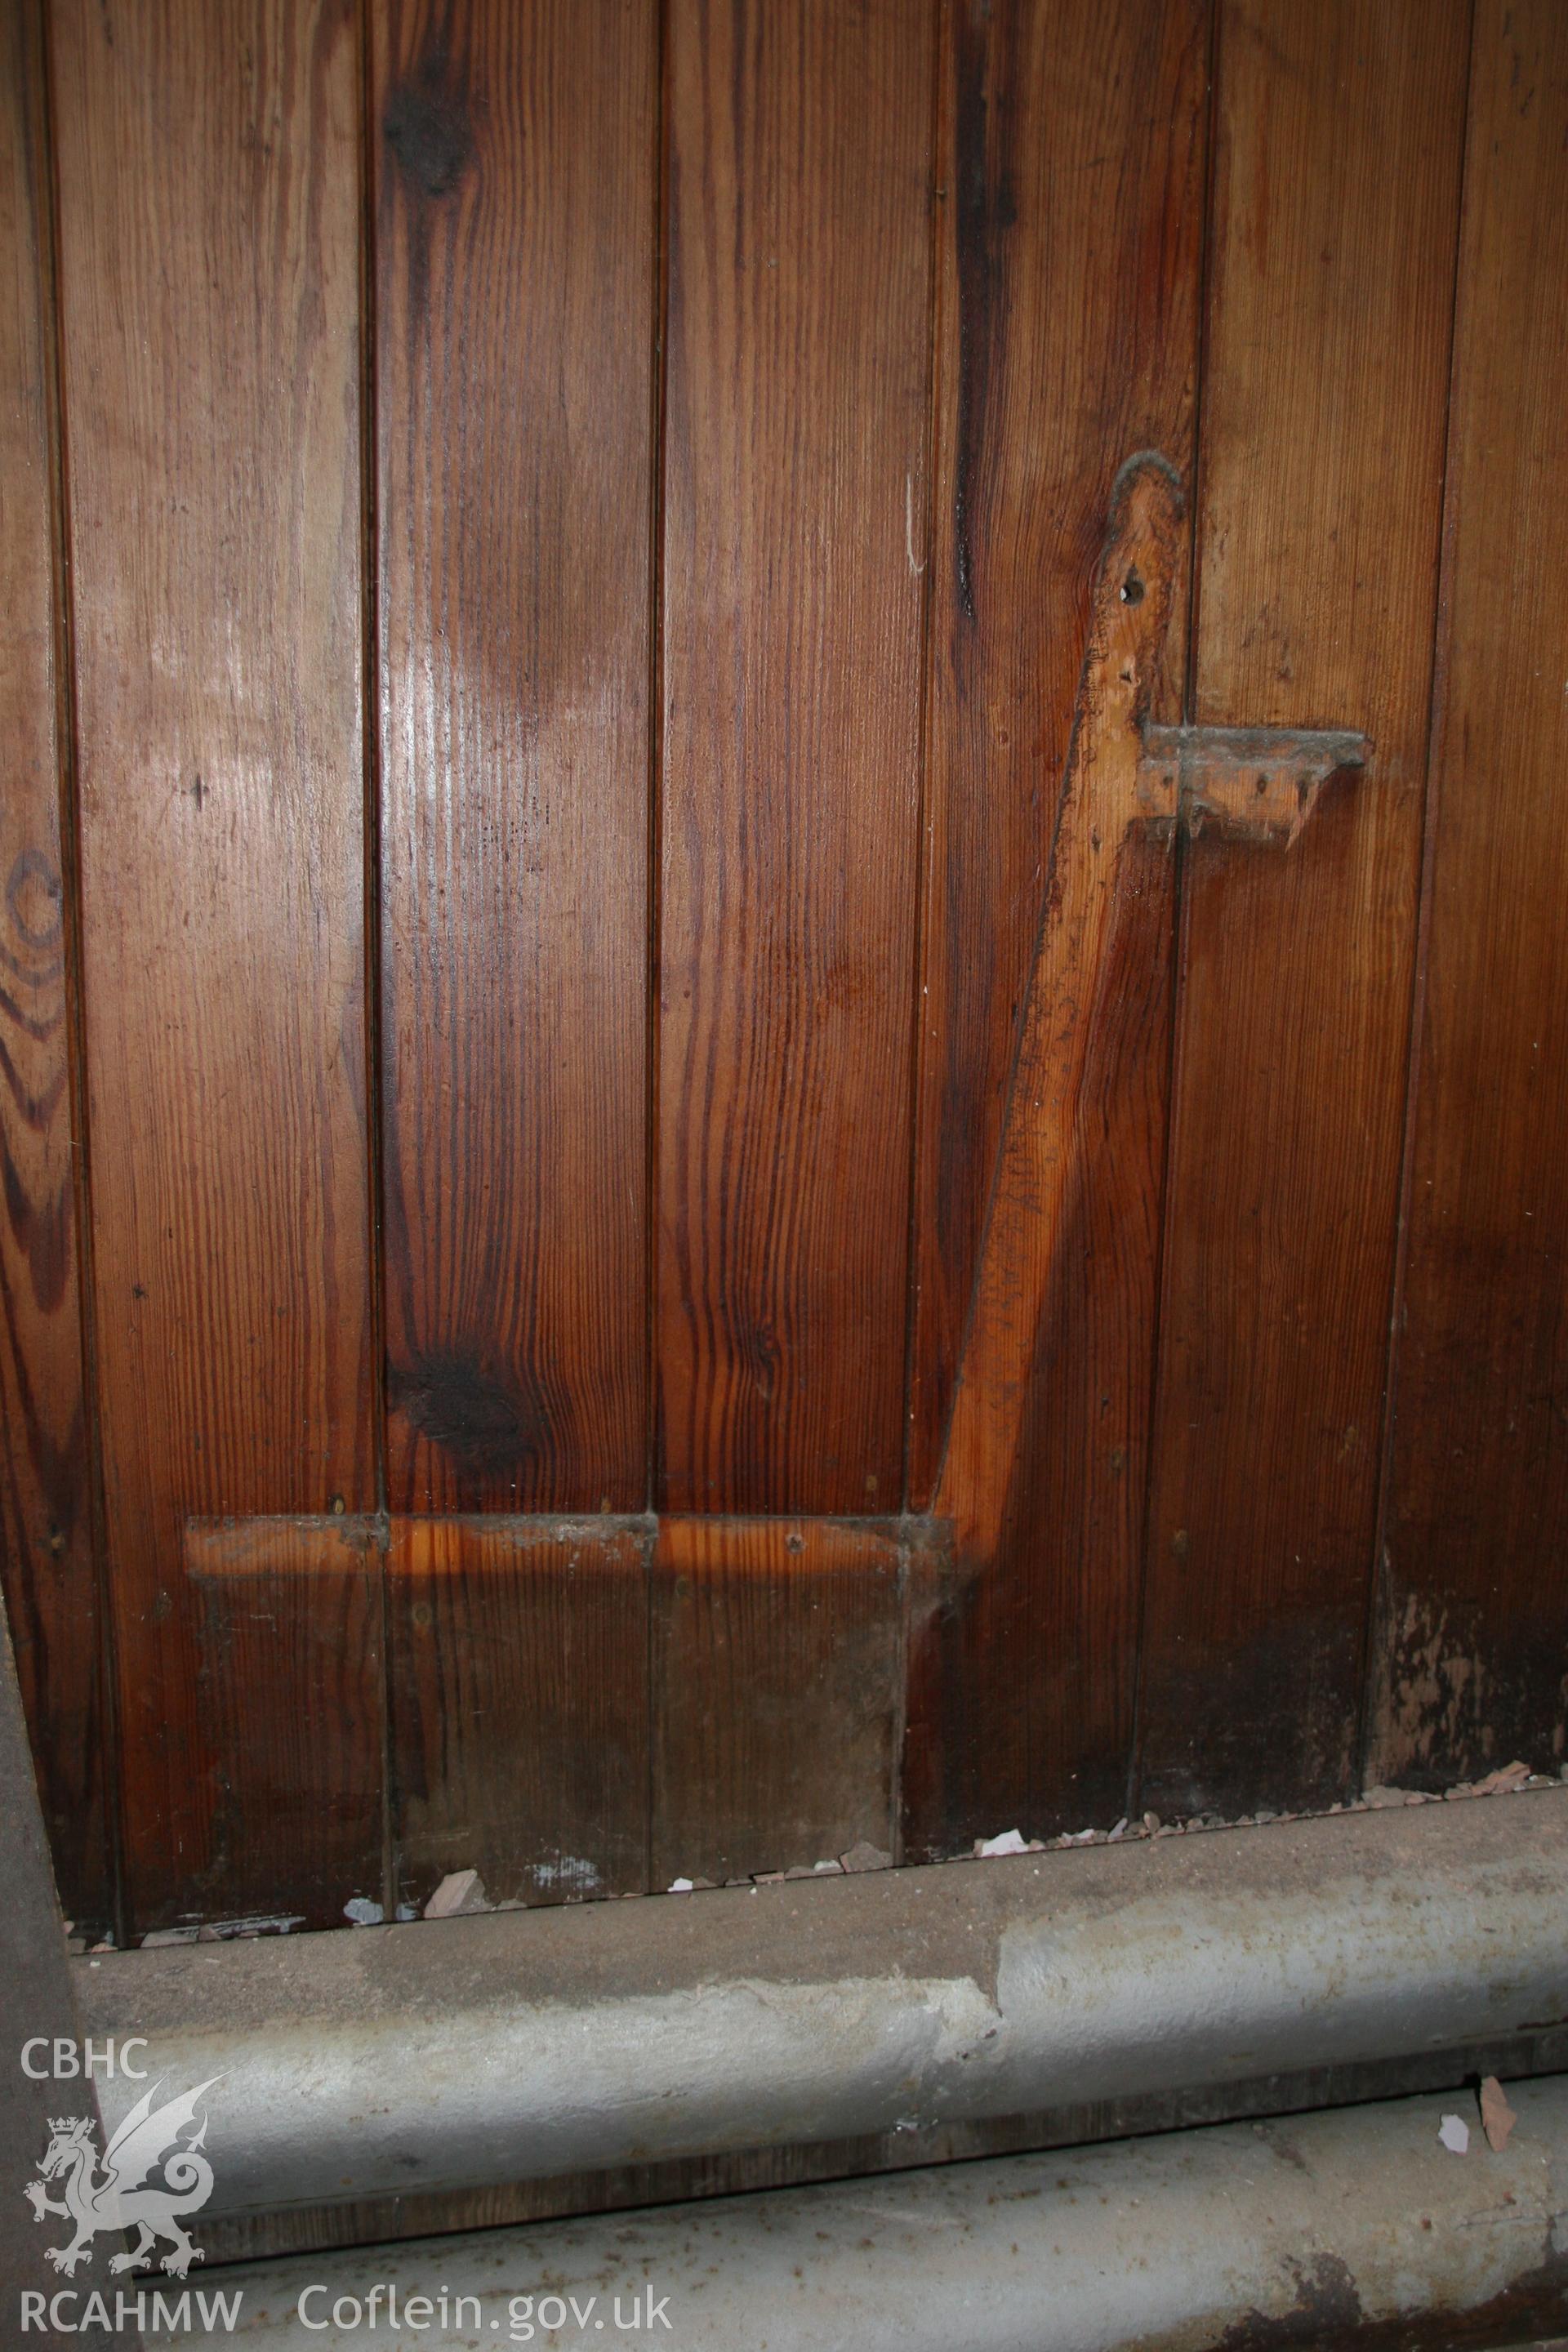 Photograph of vertical dado panelling with pew removed. Outlines to be retained for final restoration of the former Llawrybettws Welsh Calvinistic Methodist chapel. Produced by Tim Allen on 7/03/2019 to meet a condition attached to planning application.